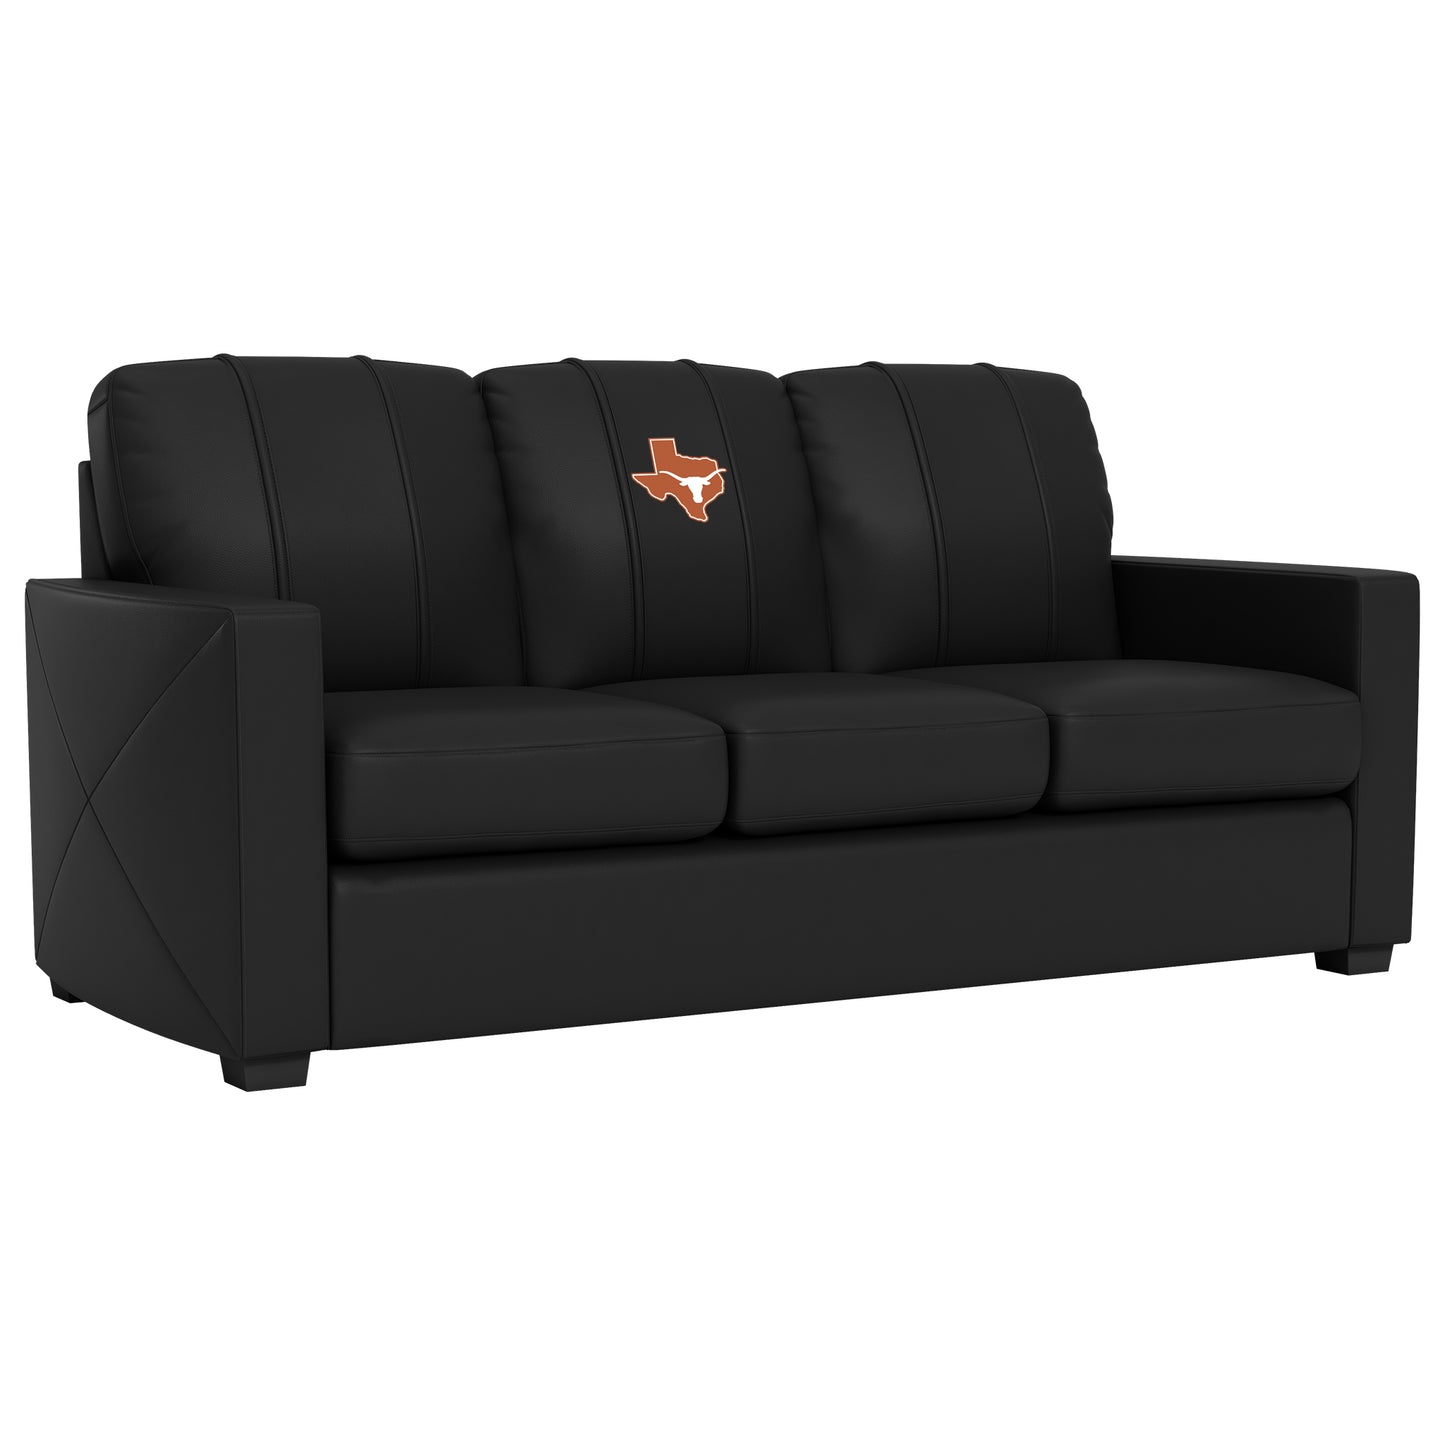 Silver Sofa with Texas Longhorns Secondary